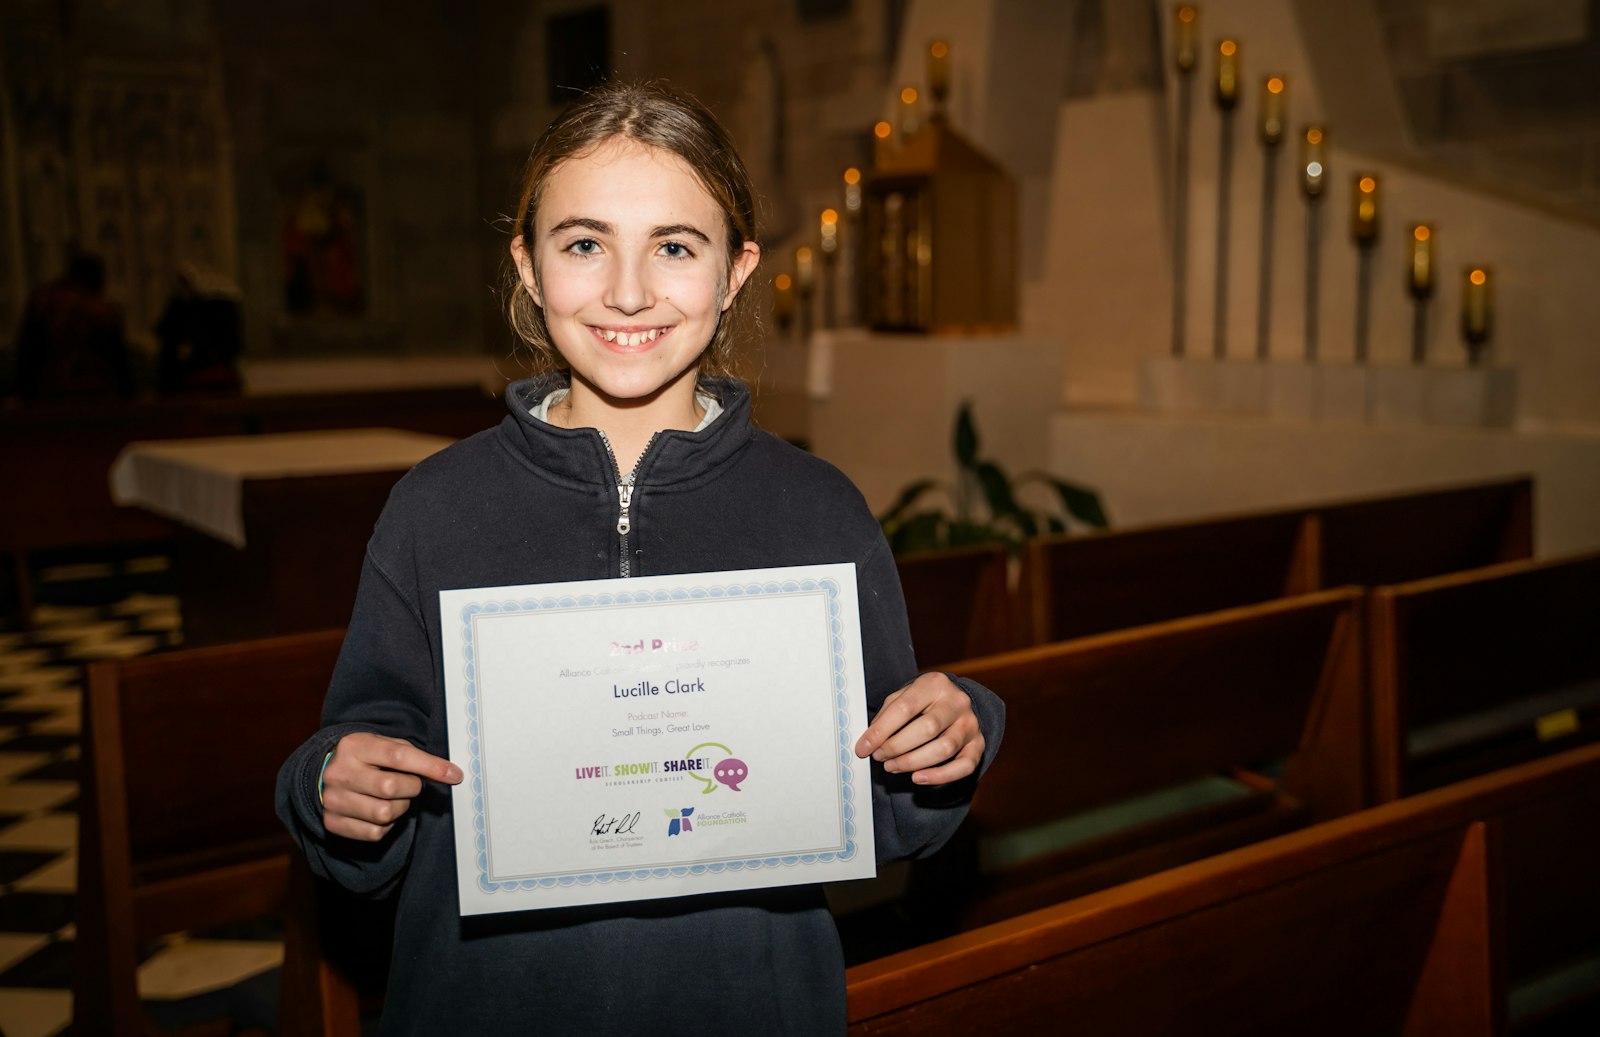 Lucille Clark, the second-place scholarship winner, was chosen from among the 10 finalists to produce a limited series of her podcast, "The Little Way," alongside the Archdiocese of Detroit's Department of Communications. Clark's podcast idea is based on the life and works of St. Therese of Lisieux.